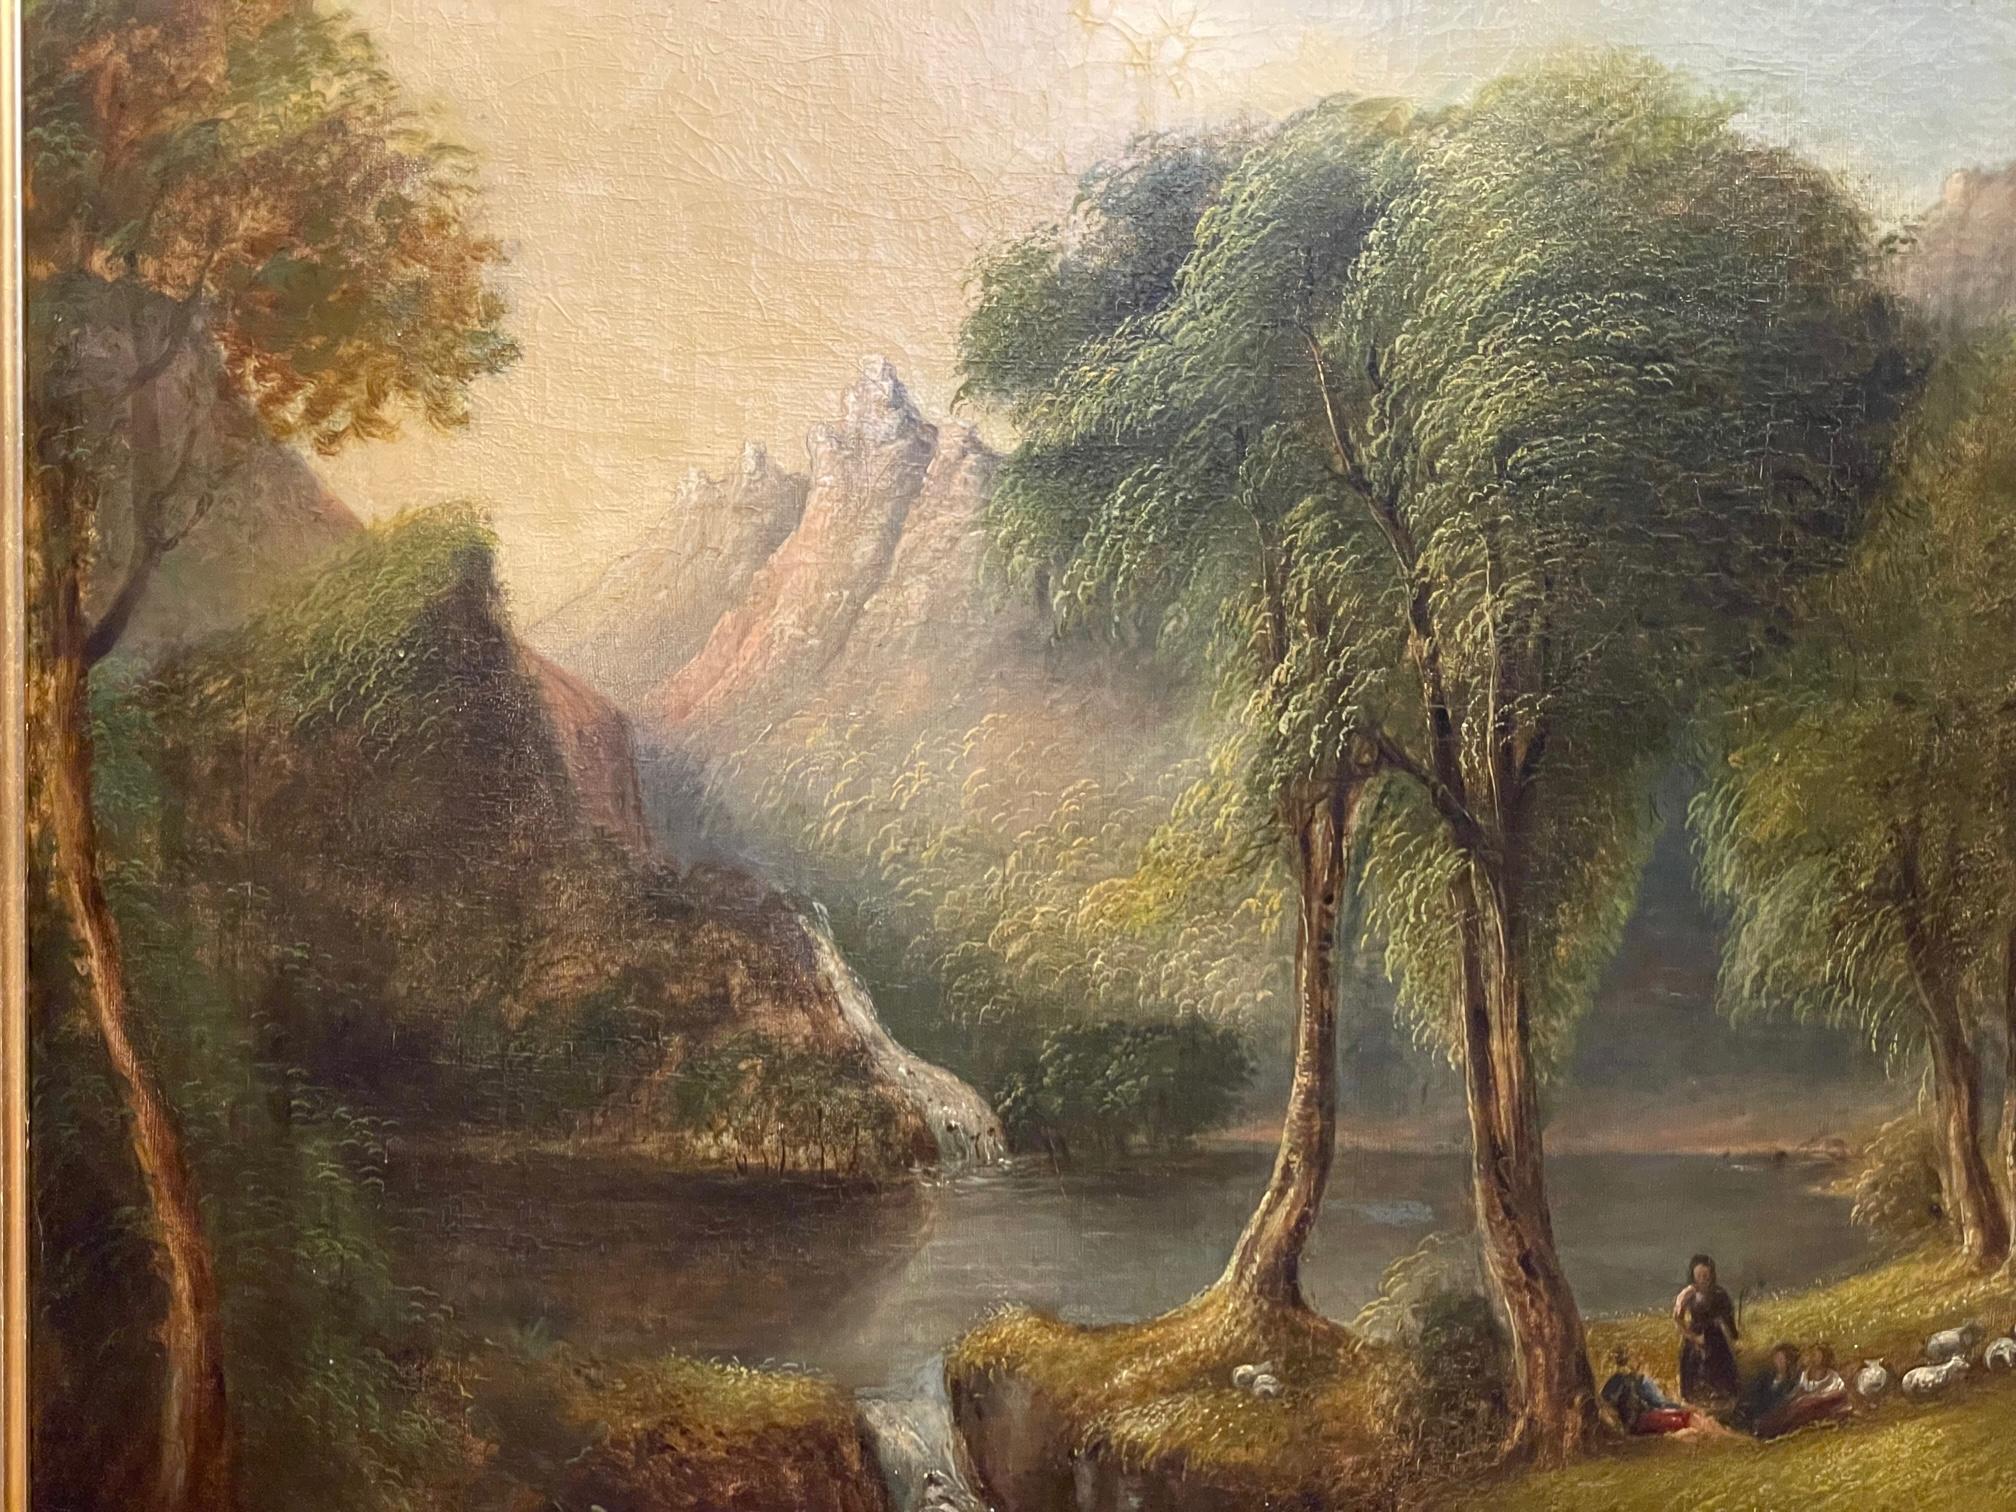 Fine landscape painting from the 1800s with name plate of Samuel Bough, (1822-1878), featuring the artist's skill creating movement with wind in the trees, golden tips catching the sun. The mountains catch the light, and the overall composition is